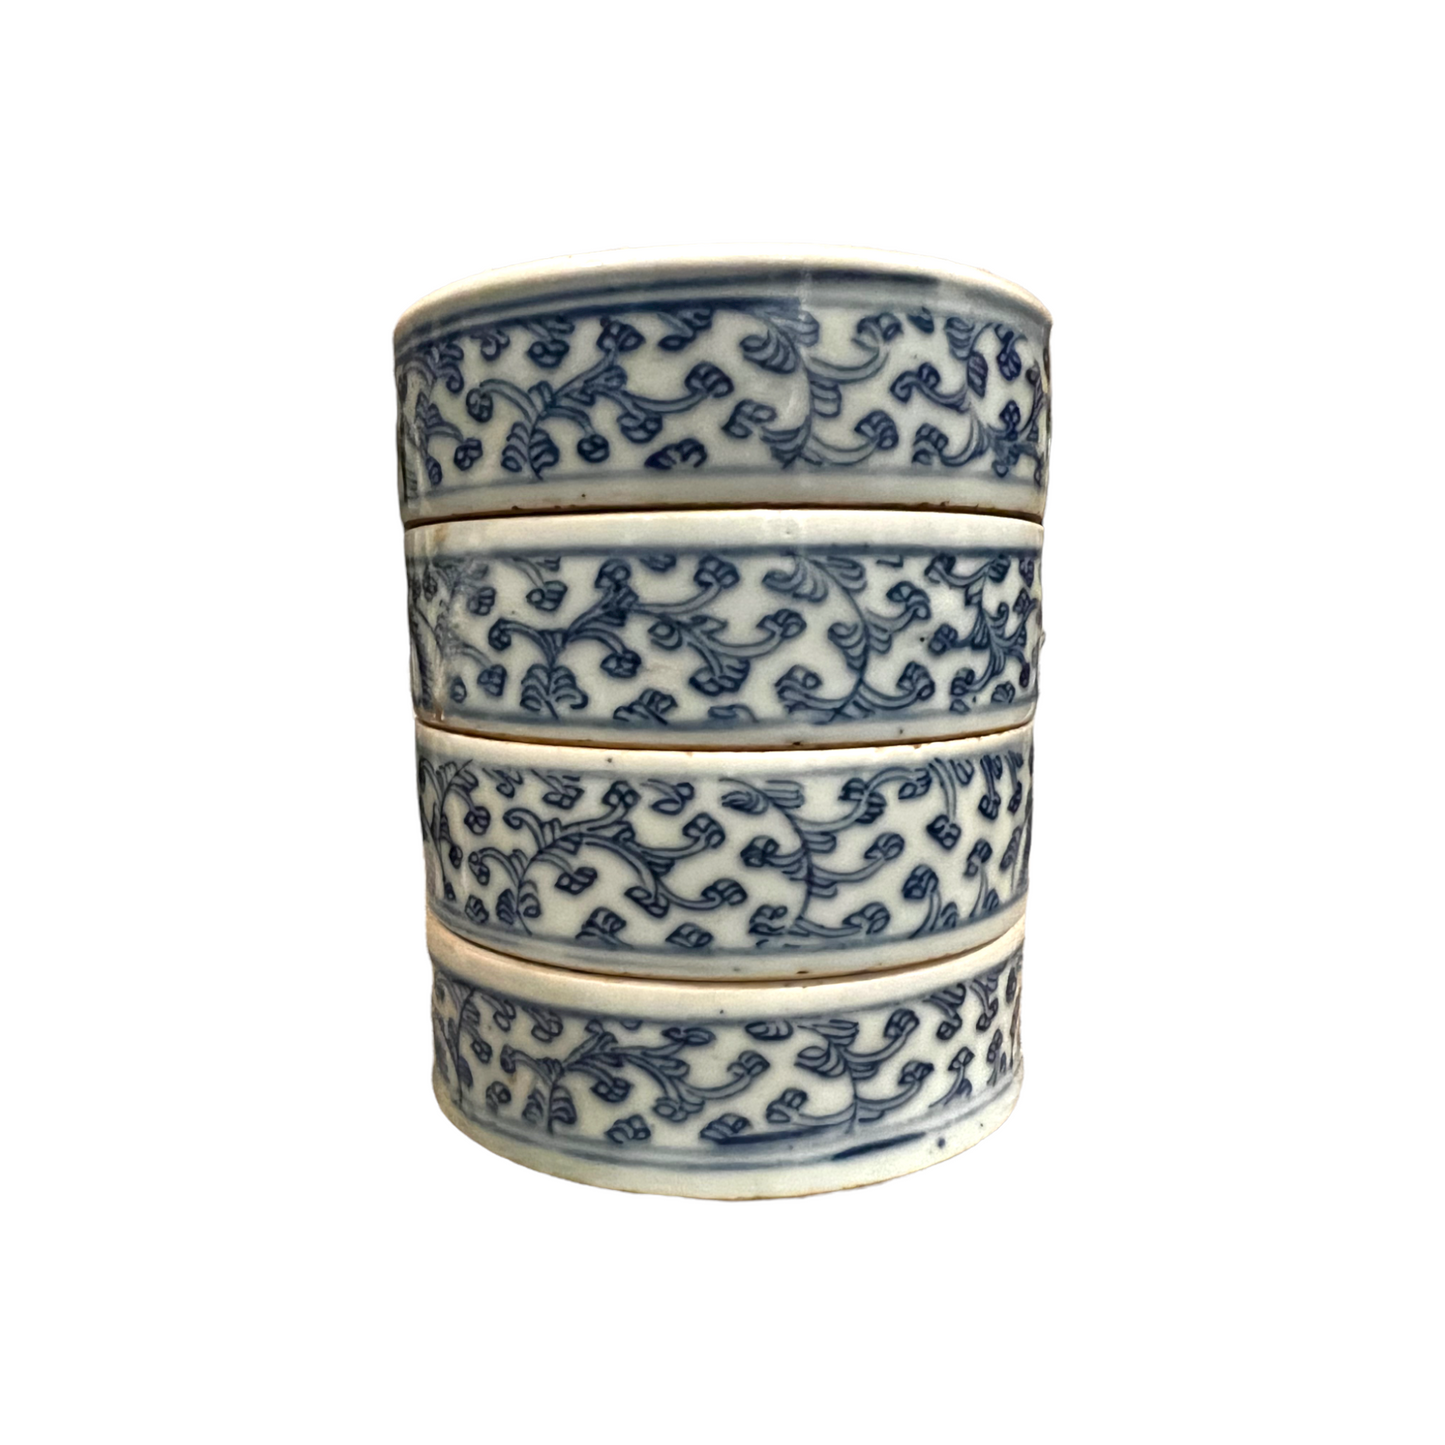 19th C Blue and White Chinese Porcelain Tiered Box